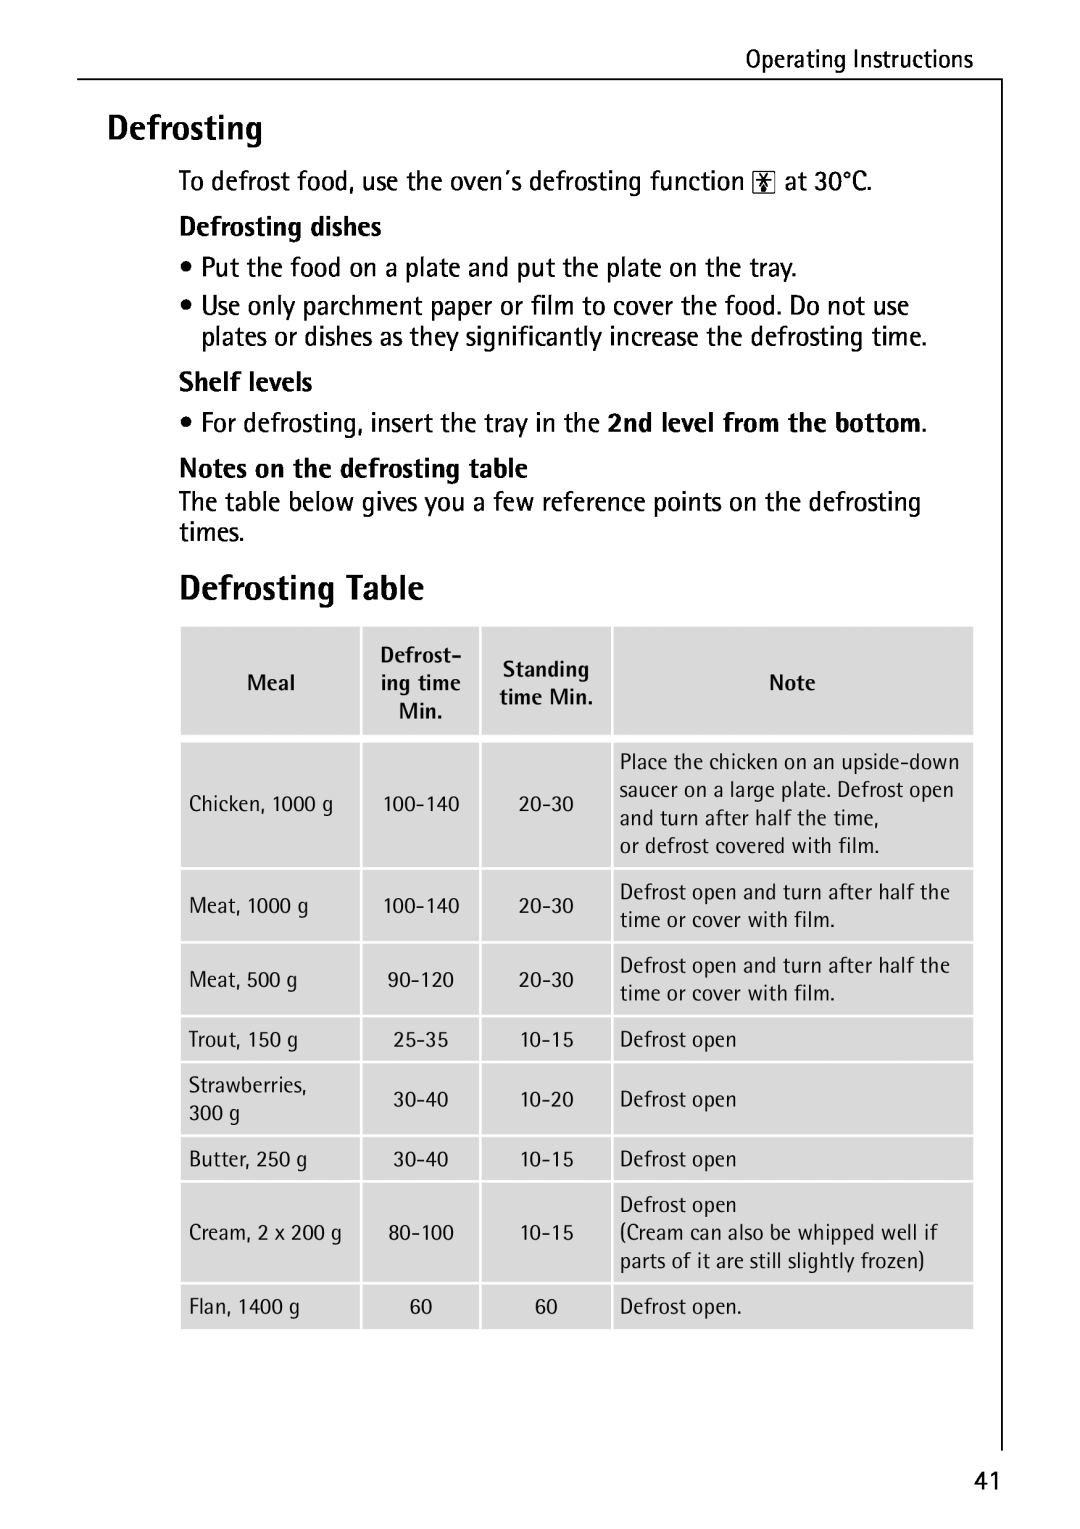 Electrolux B4140-1 manual Defrosting Table, Defrosting dishes, Shelf levels, Notes on the defrosting table 